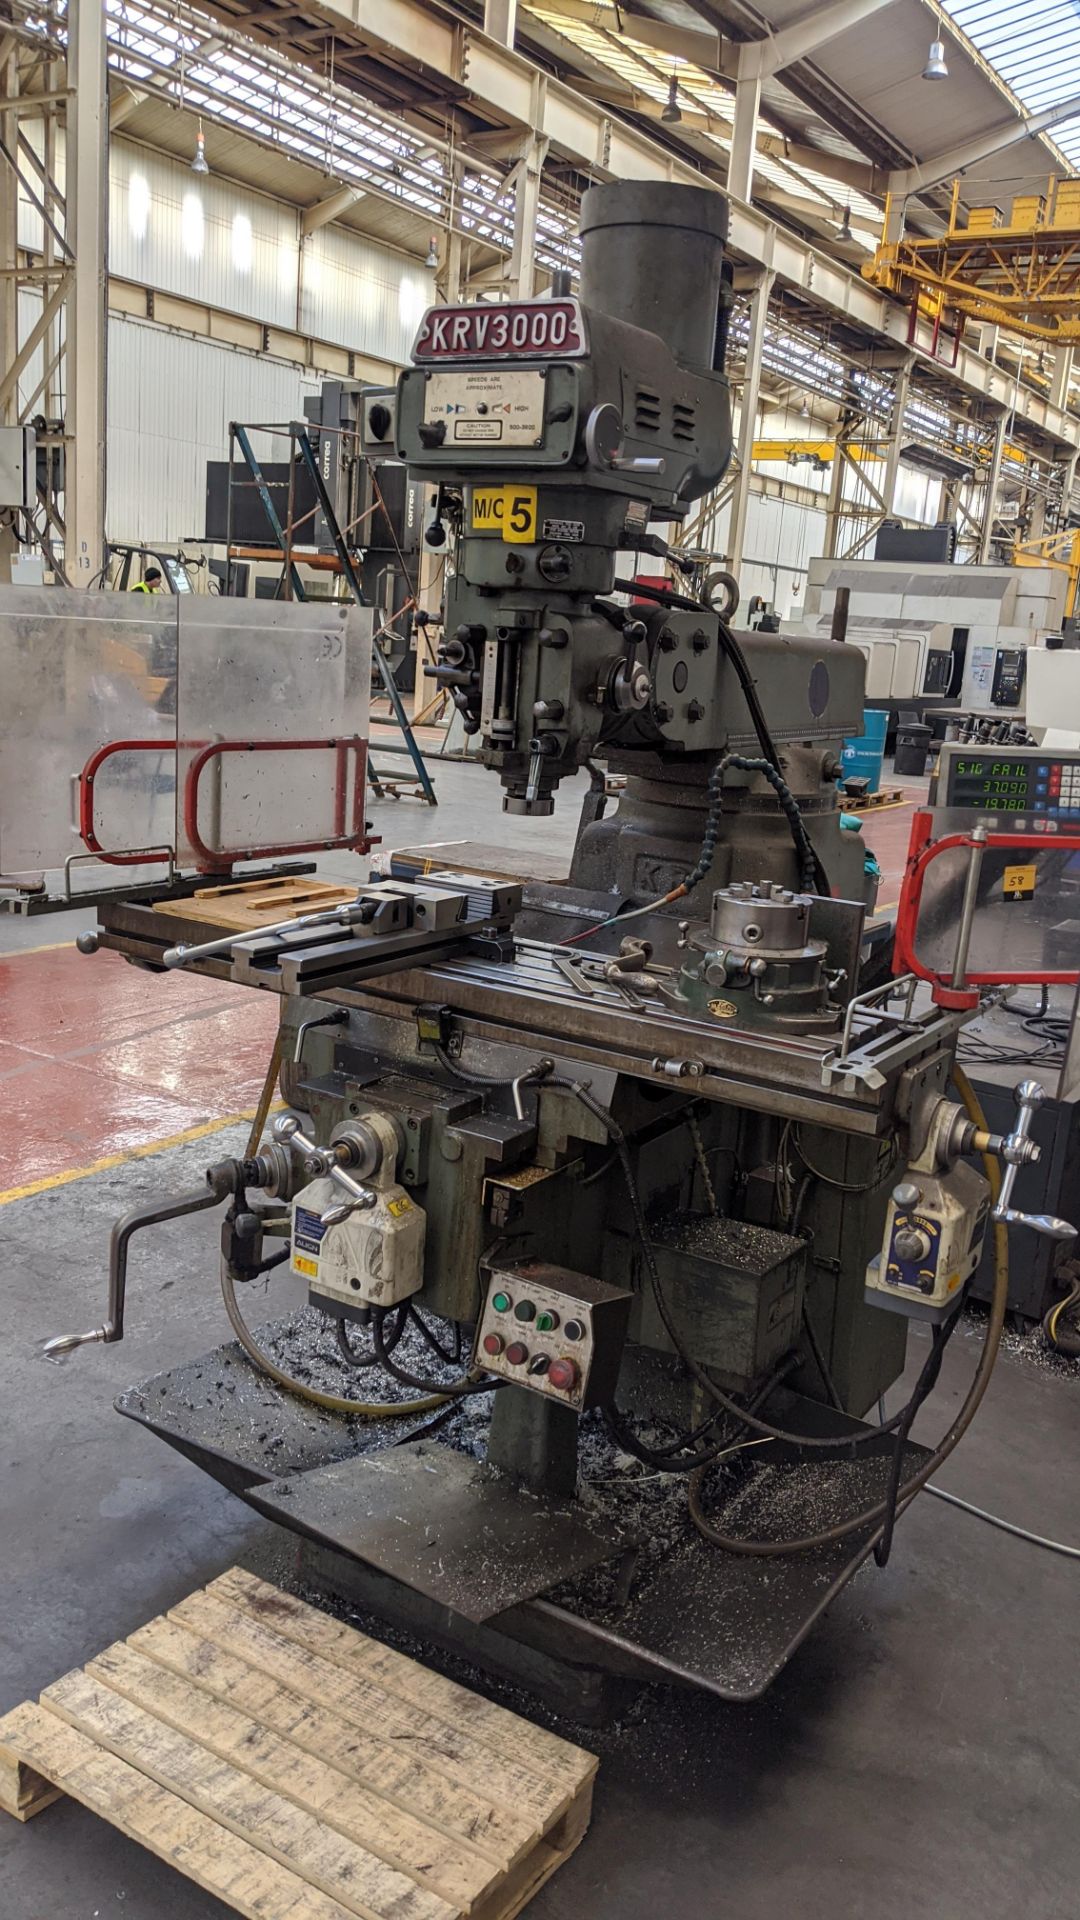 1998 King Rich KRV3000-V milling machine, serial no. 8470. Includes Newall Topaz Mill controller. - Image 11 of 15